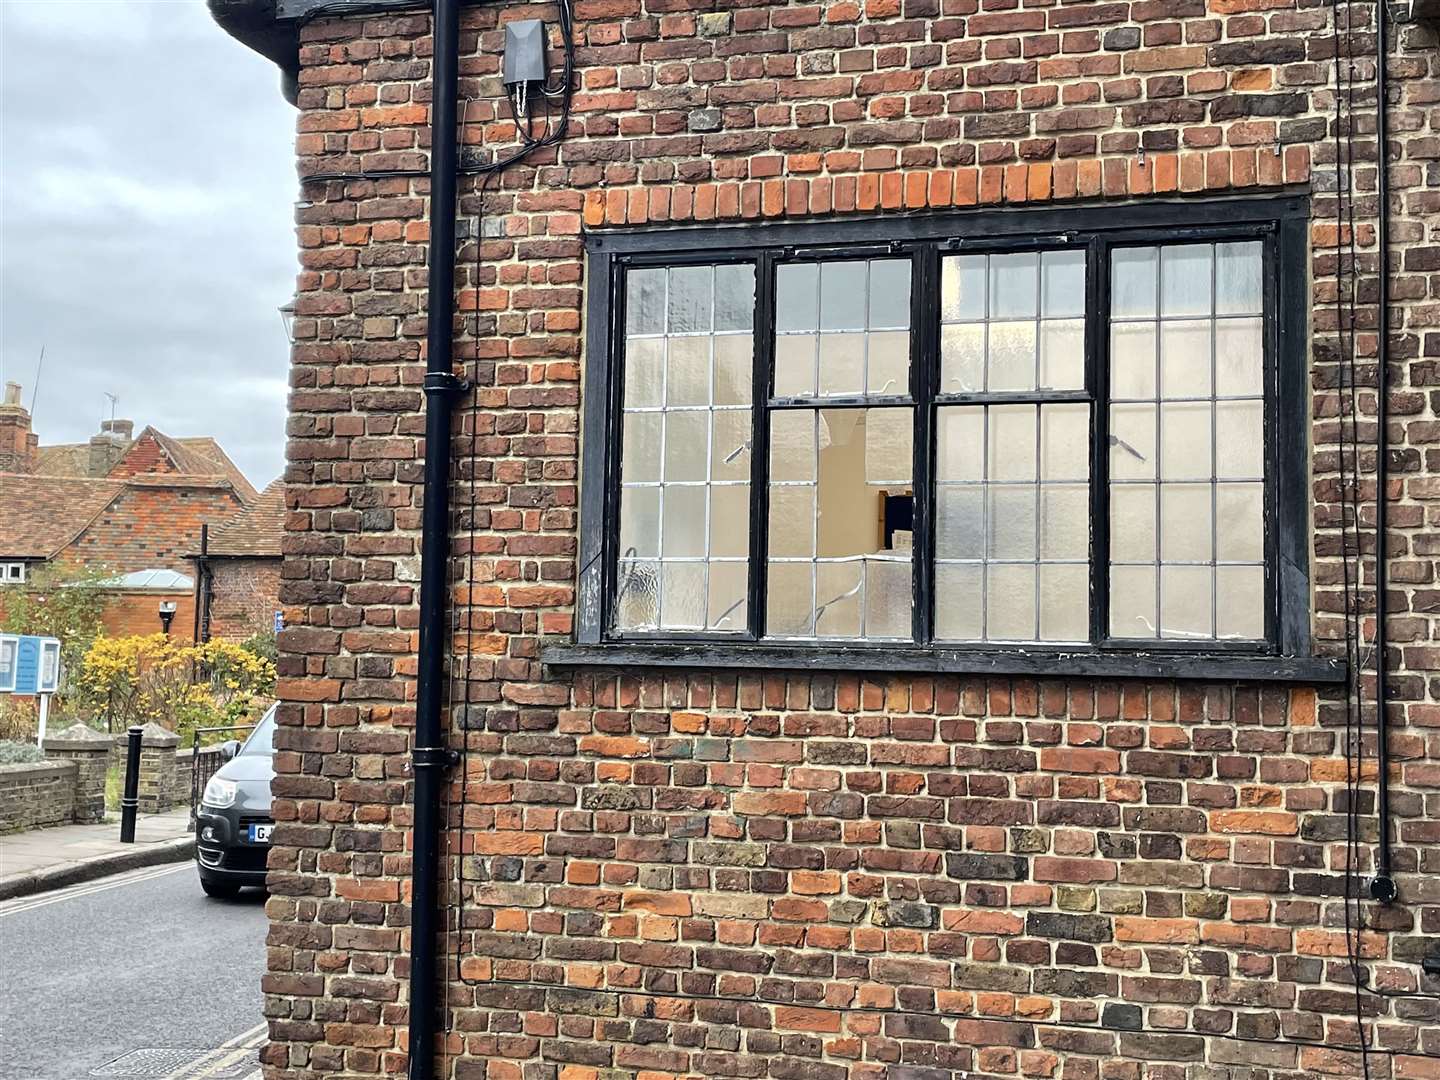 A window at Sandwich Guildhall appears smashed